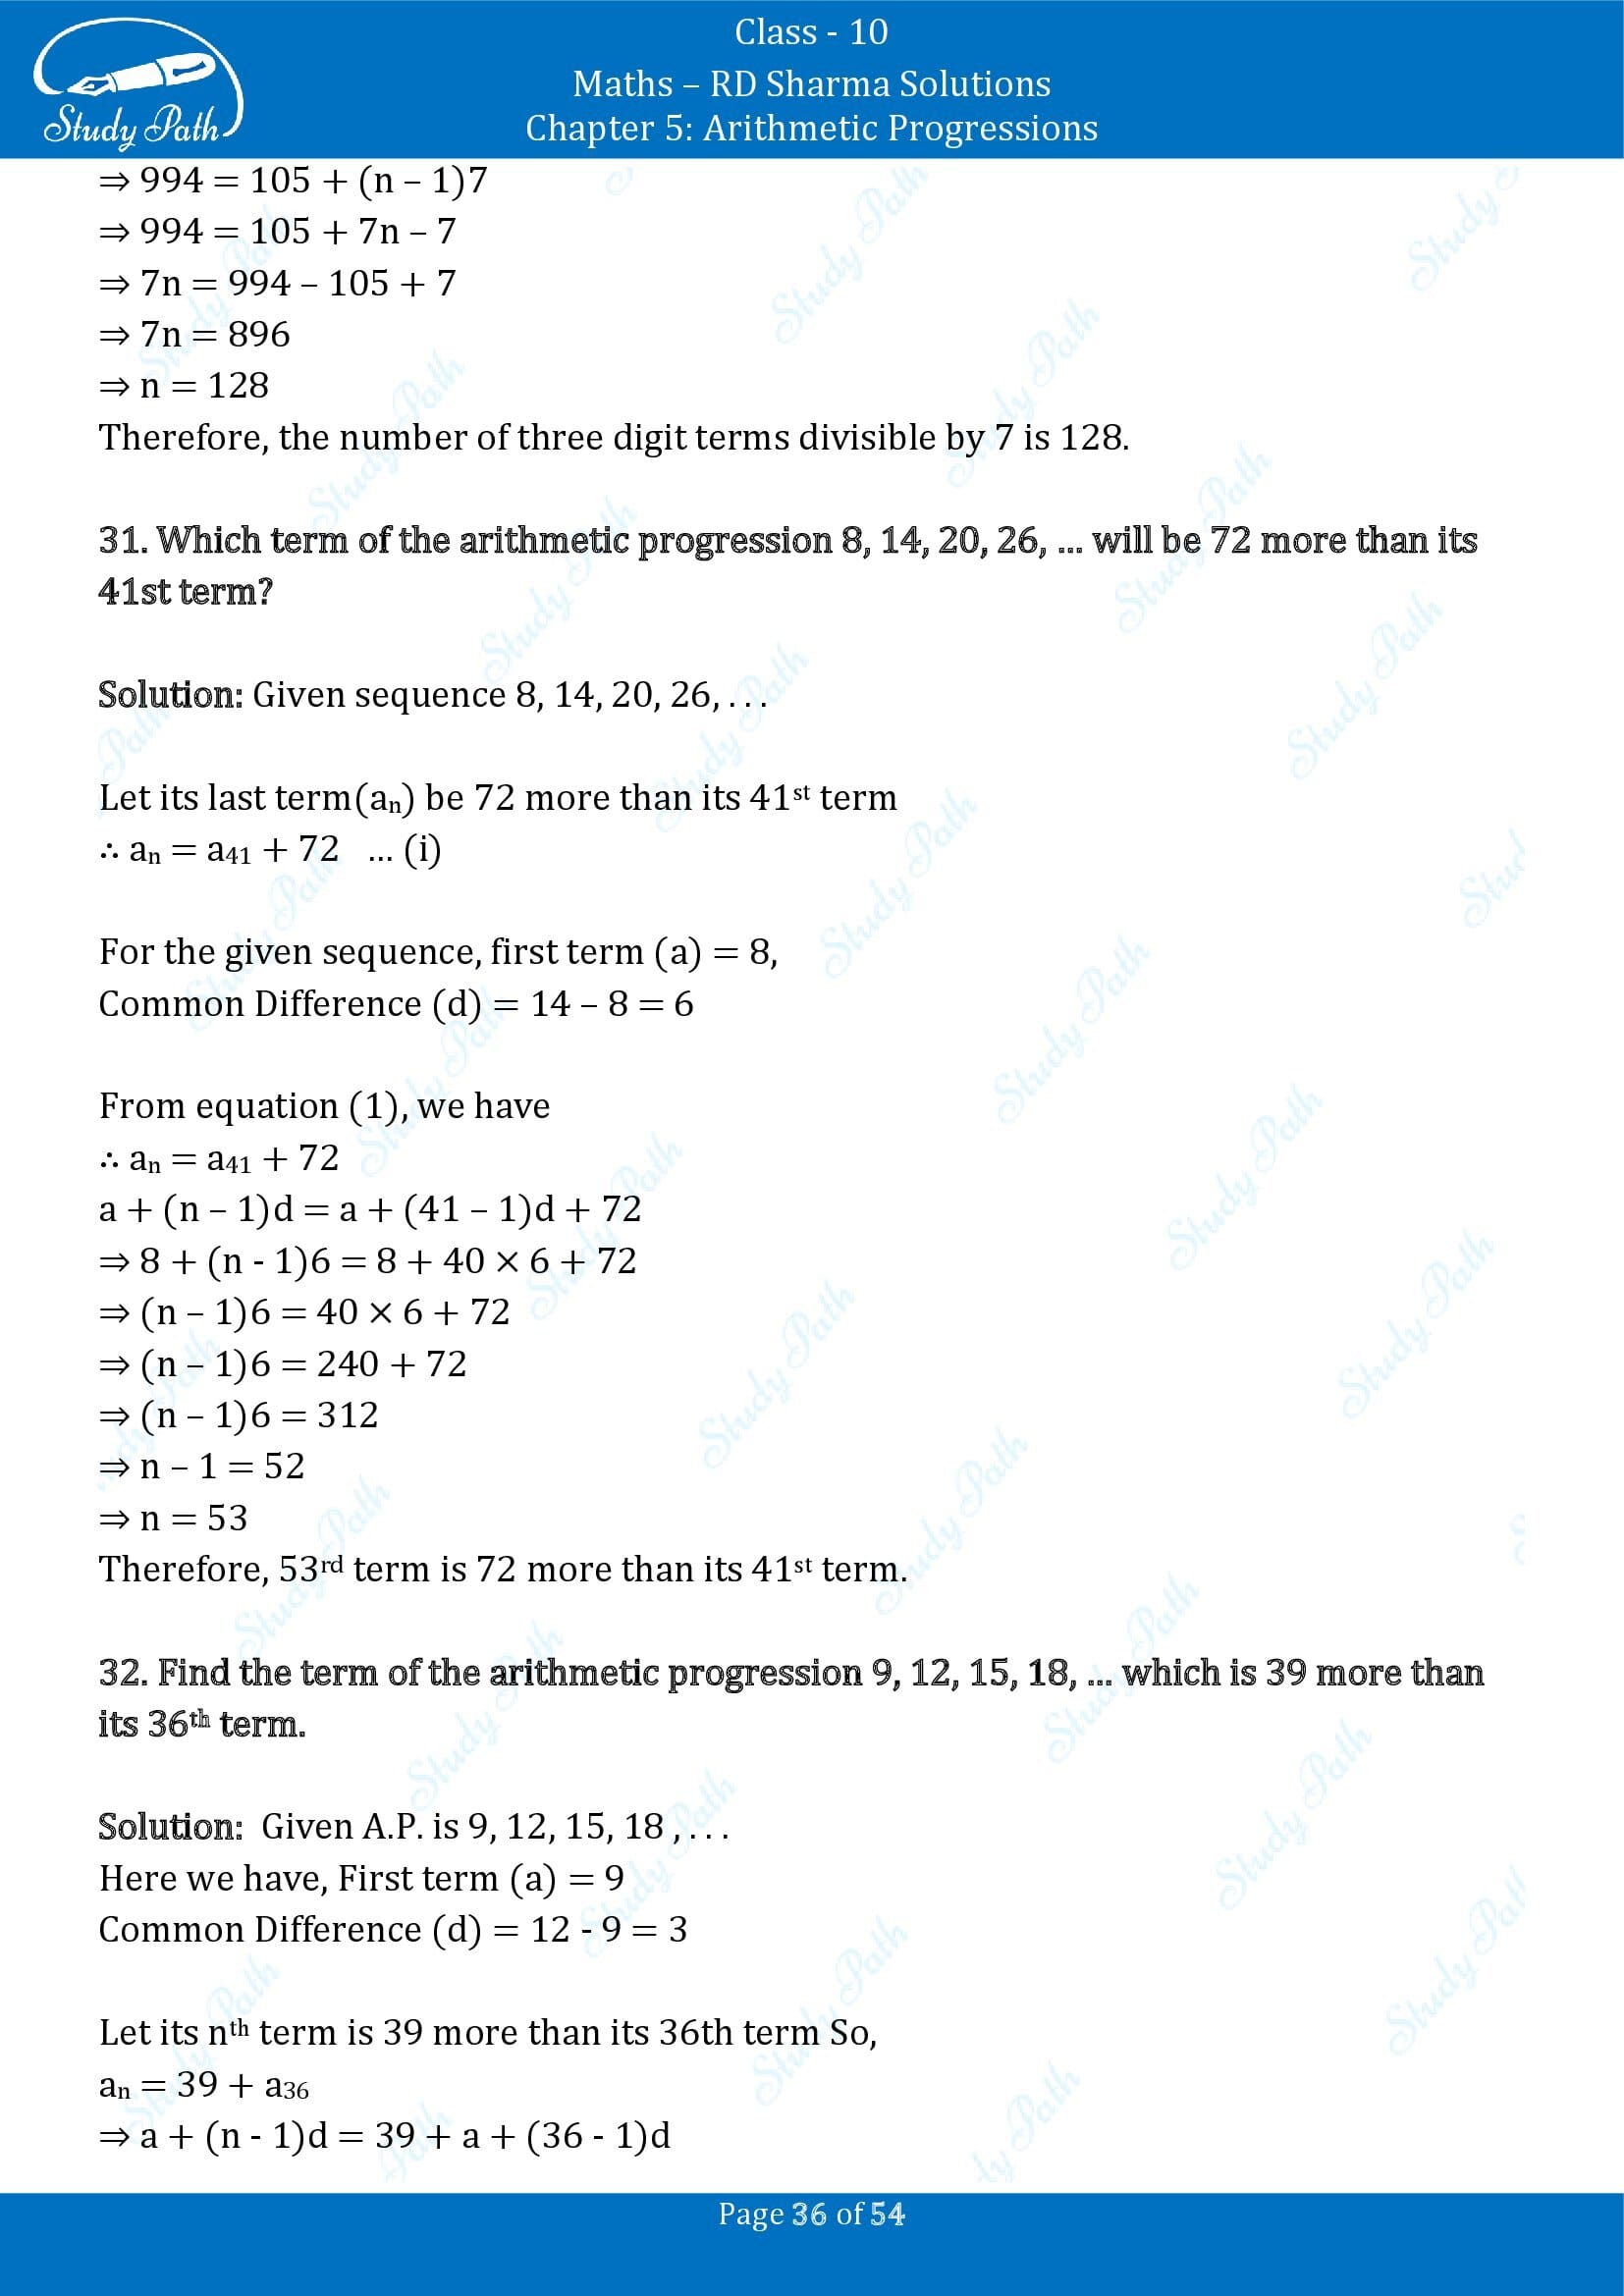 RD Sharma Solutions Class 10 Chapter 5 Arithmetic Progressions Exercise 5.4 00036